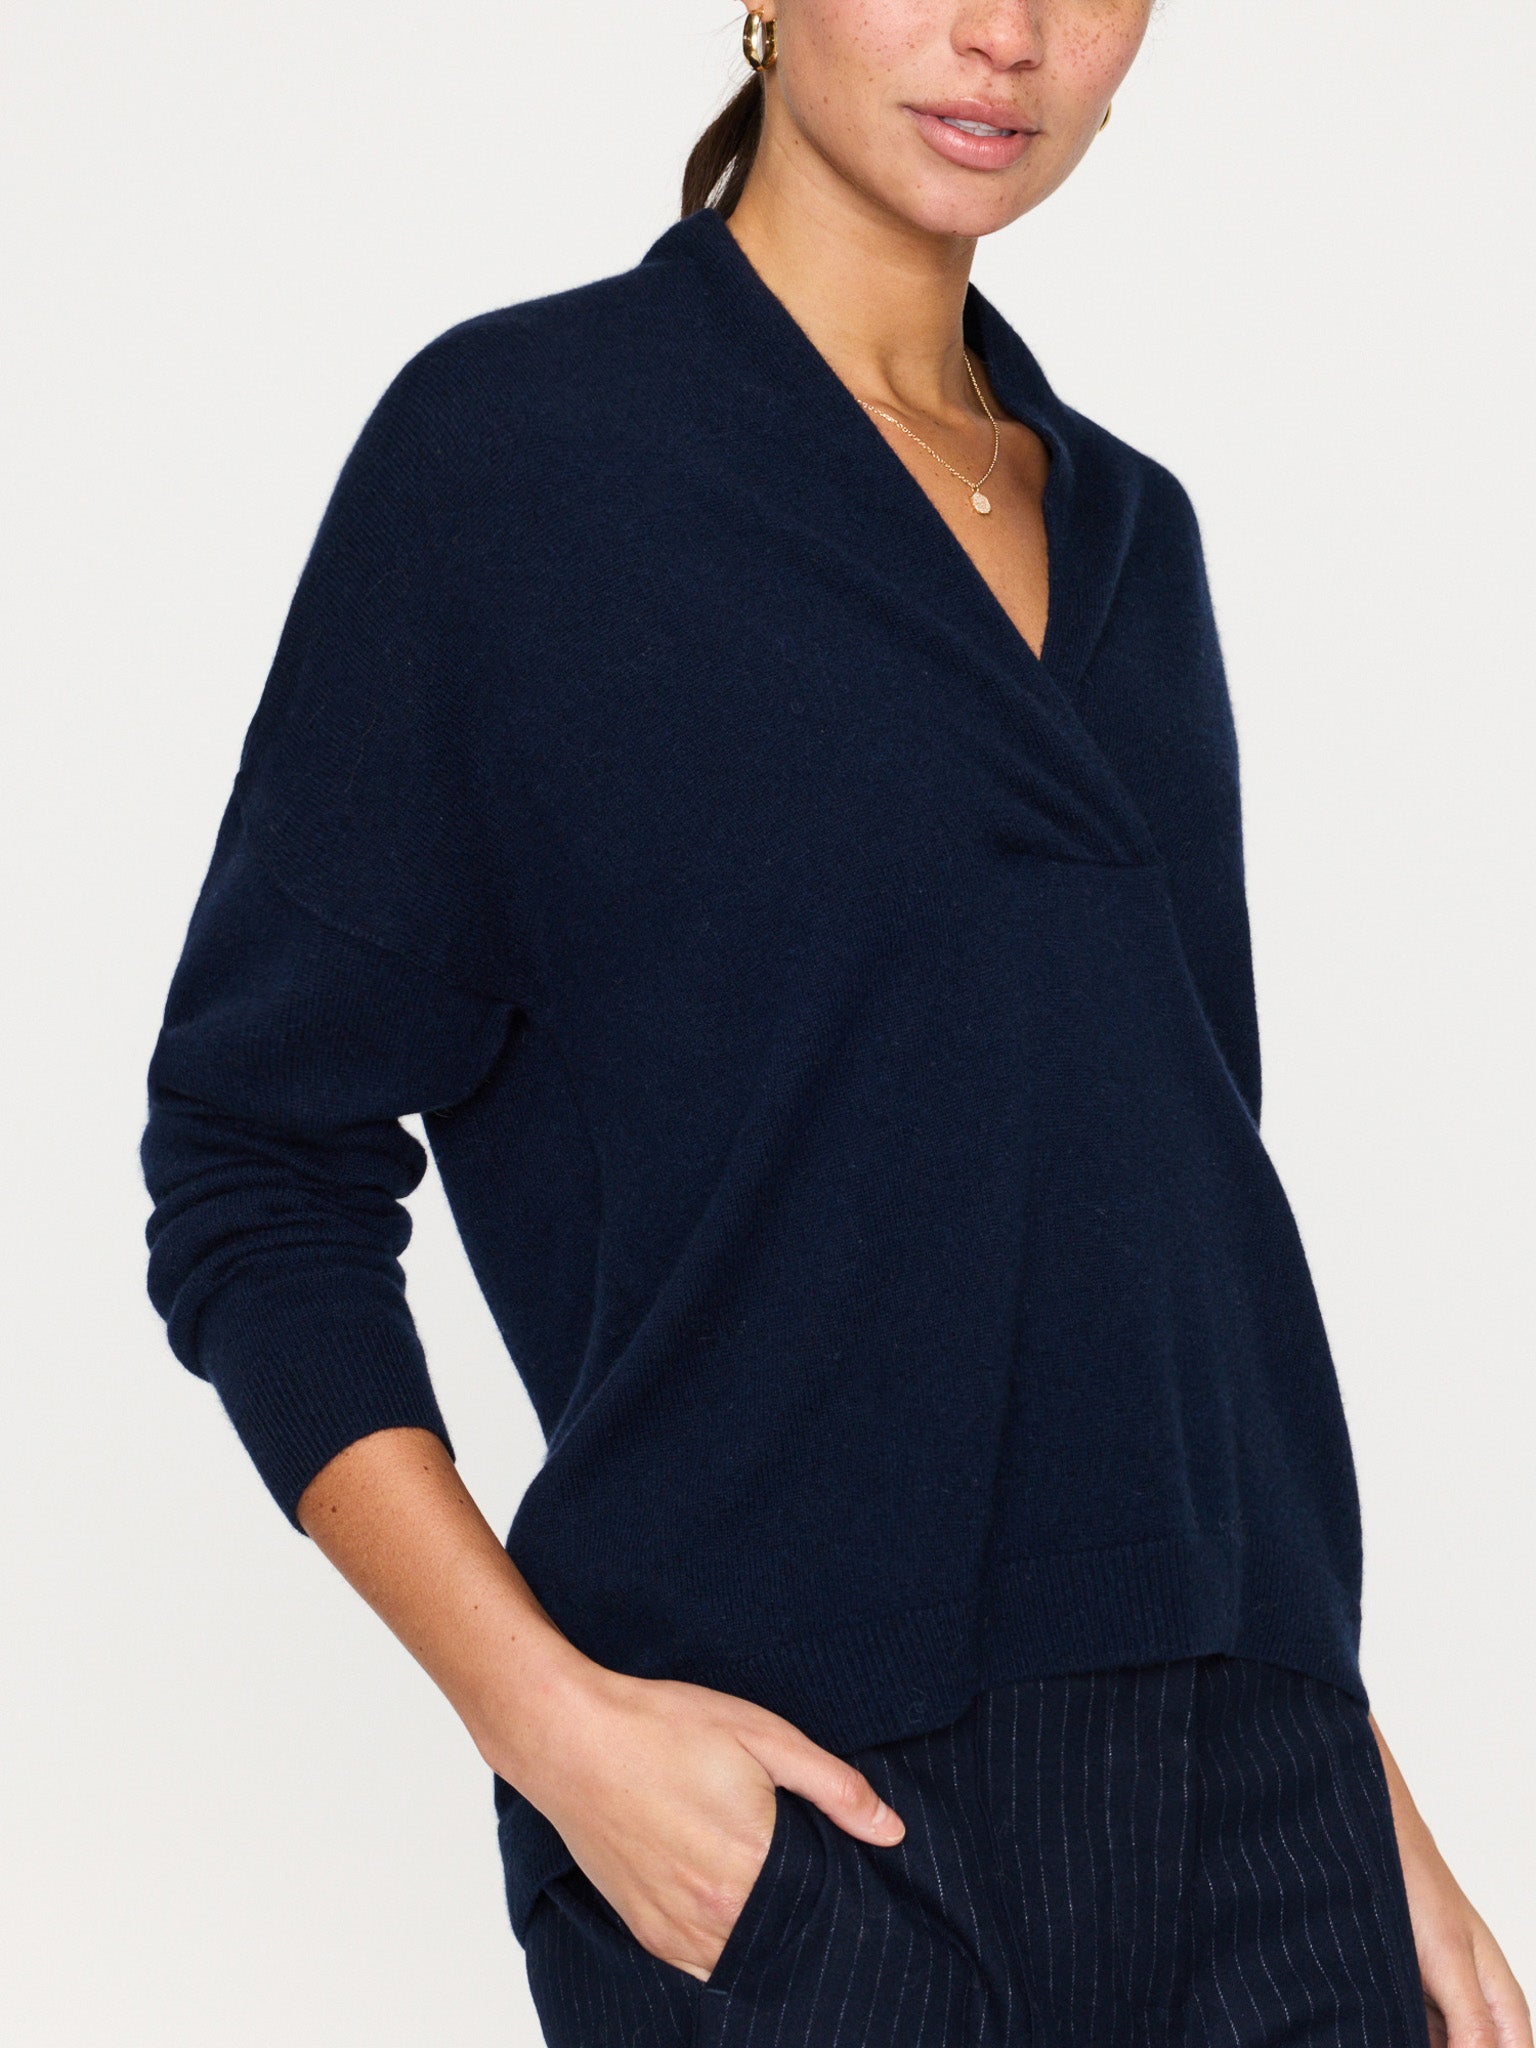 Siena v-neck pullover navy sweater side view